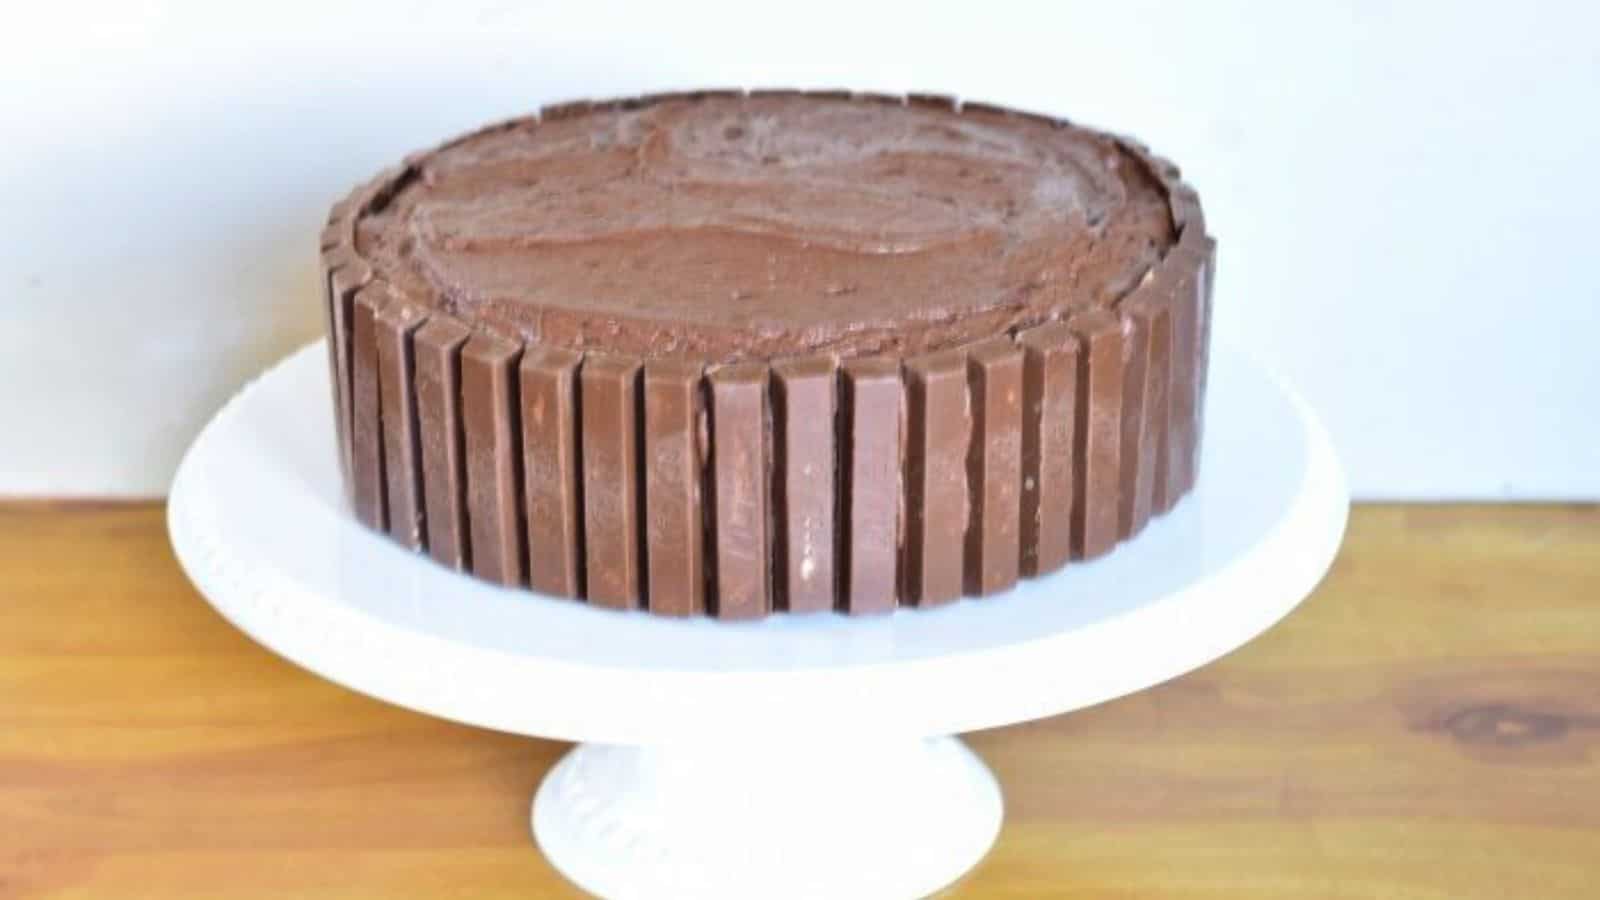 Image shows a Kit Kat cake on a white cake stand with a white background.